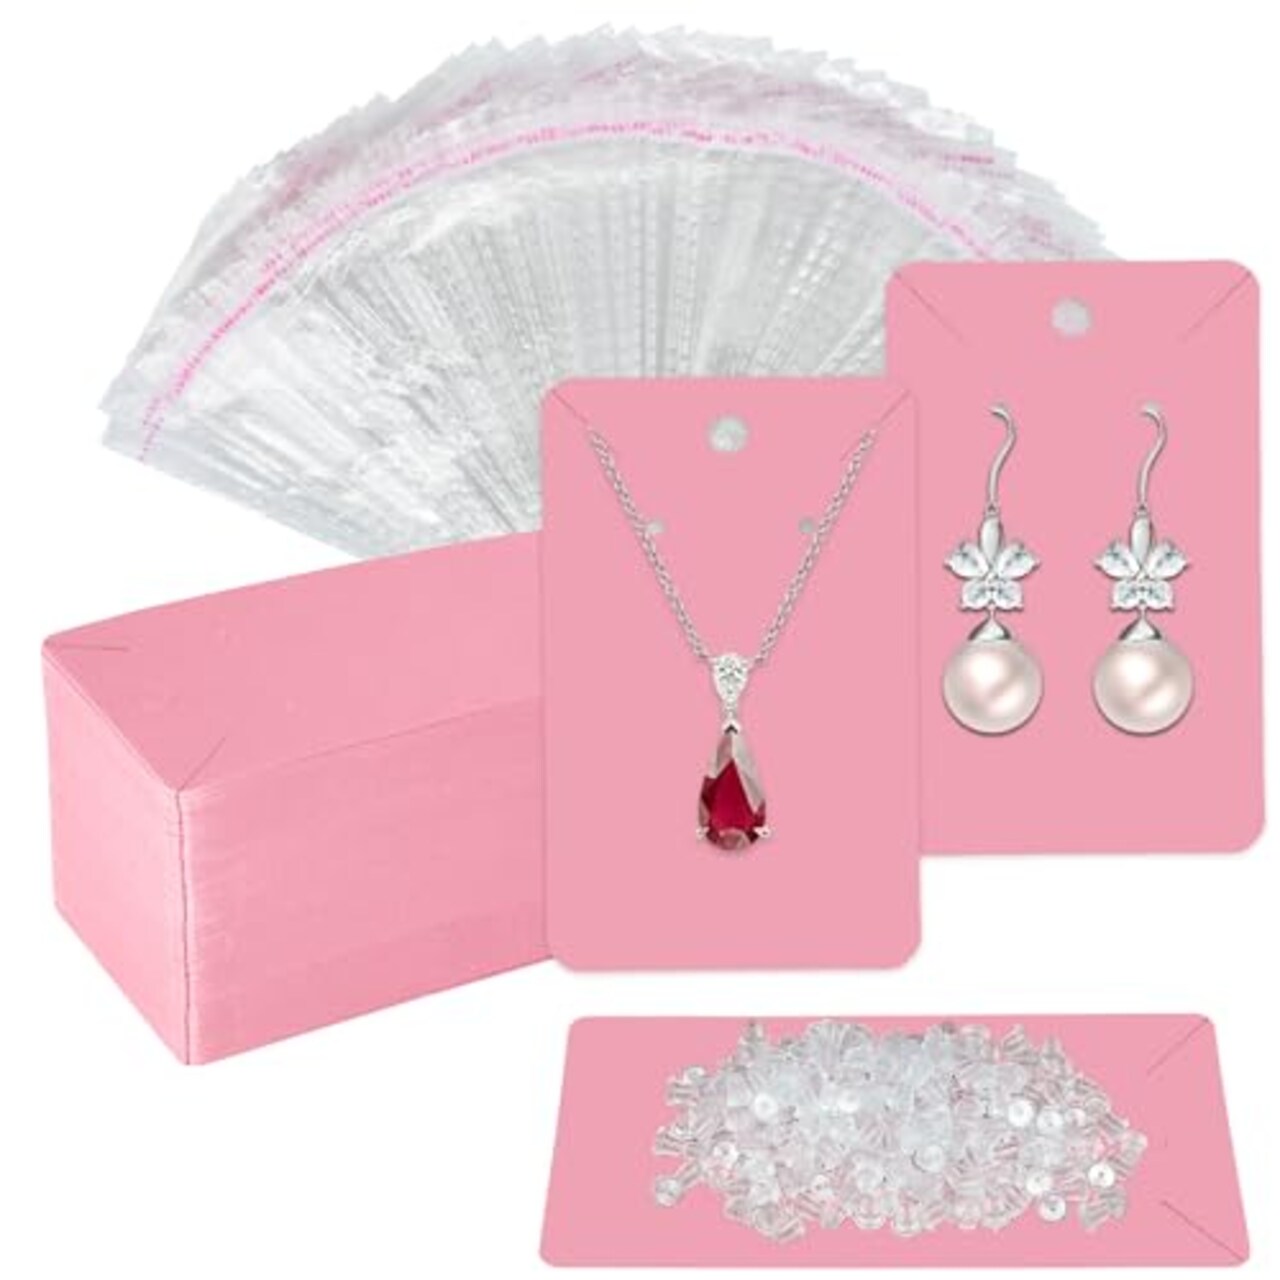 Twavang Pink Earring Cards for Selling Set with 100Pcs Earring Display  Cards, 200 Pcs Earring Backs and 100Pcs Jewelry Packaging Bag for Earrings  Necklace Jewelry Display (3.5 x 2.3 Inches)